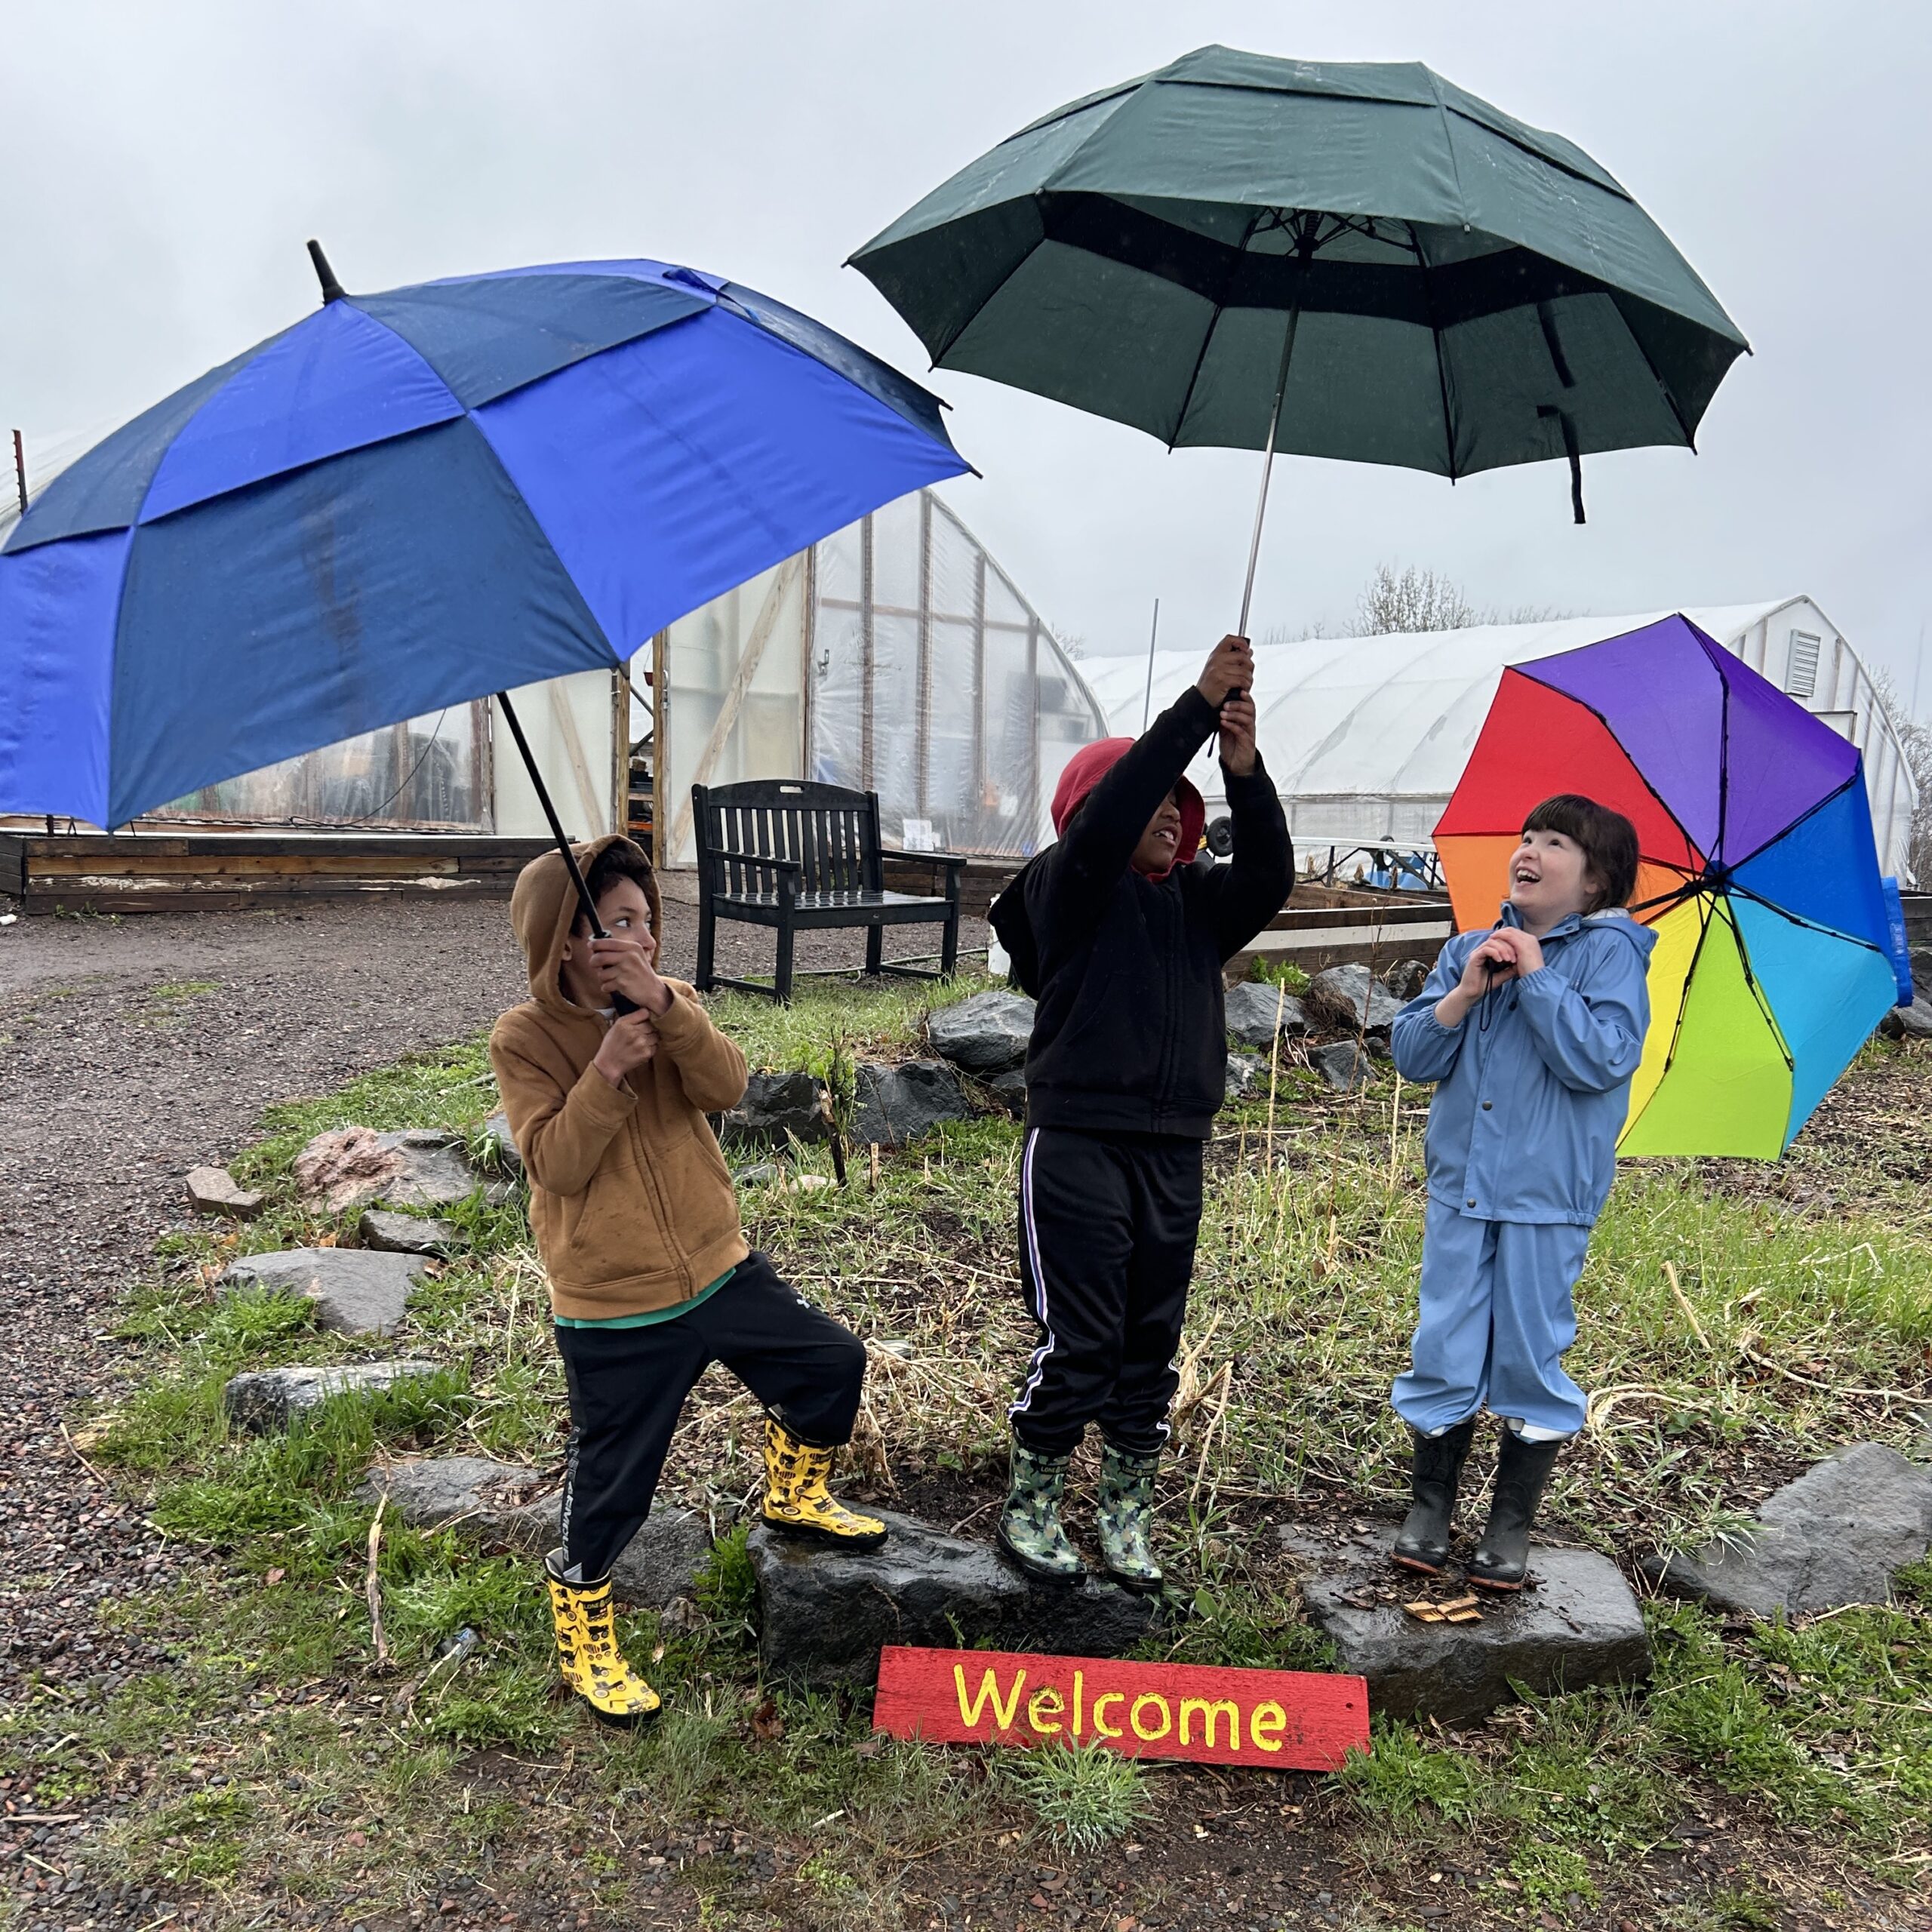 Three children with umbrellas pose joyfully by a "welcome" sign on the Farm.